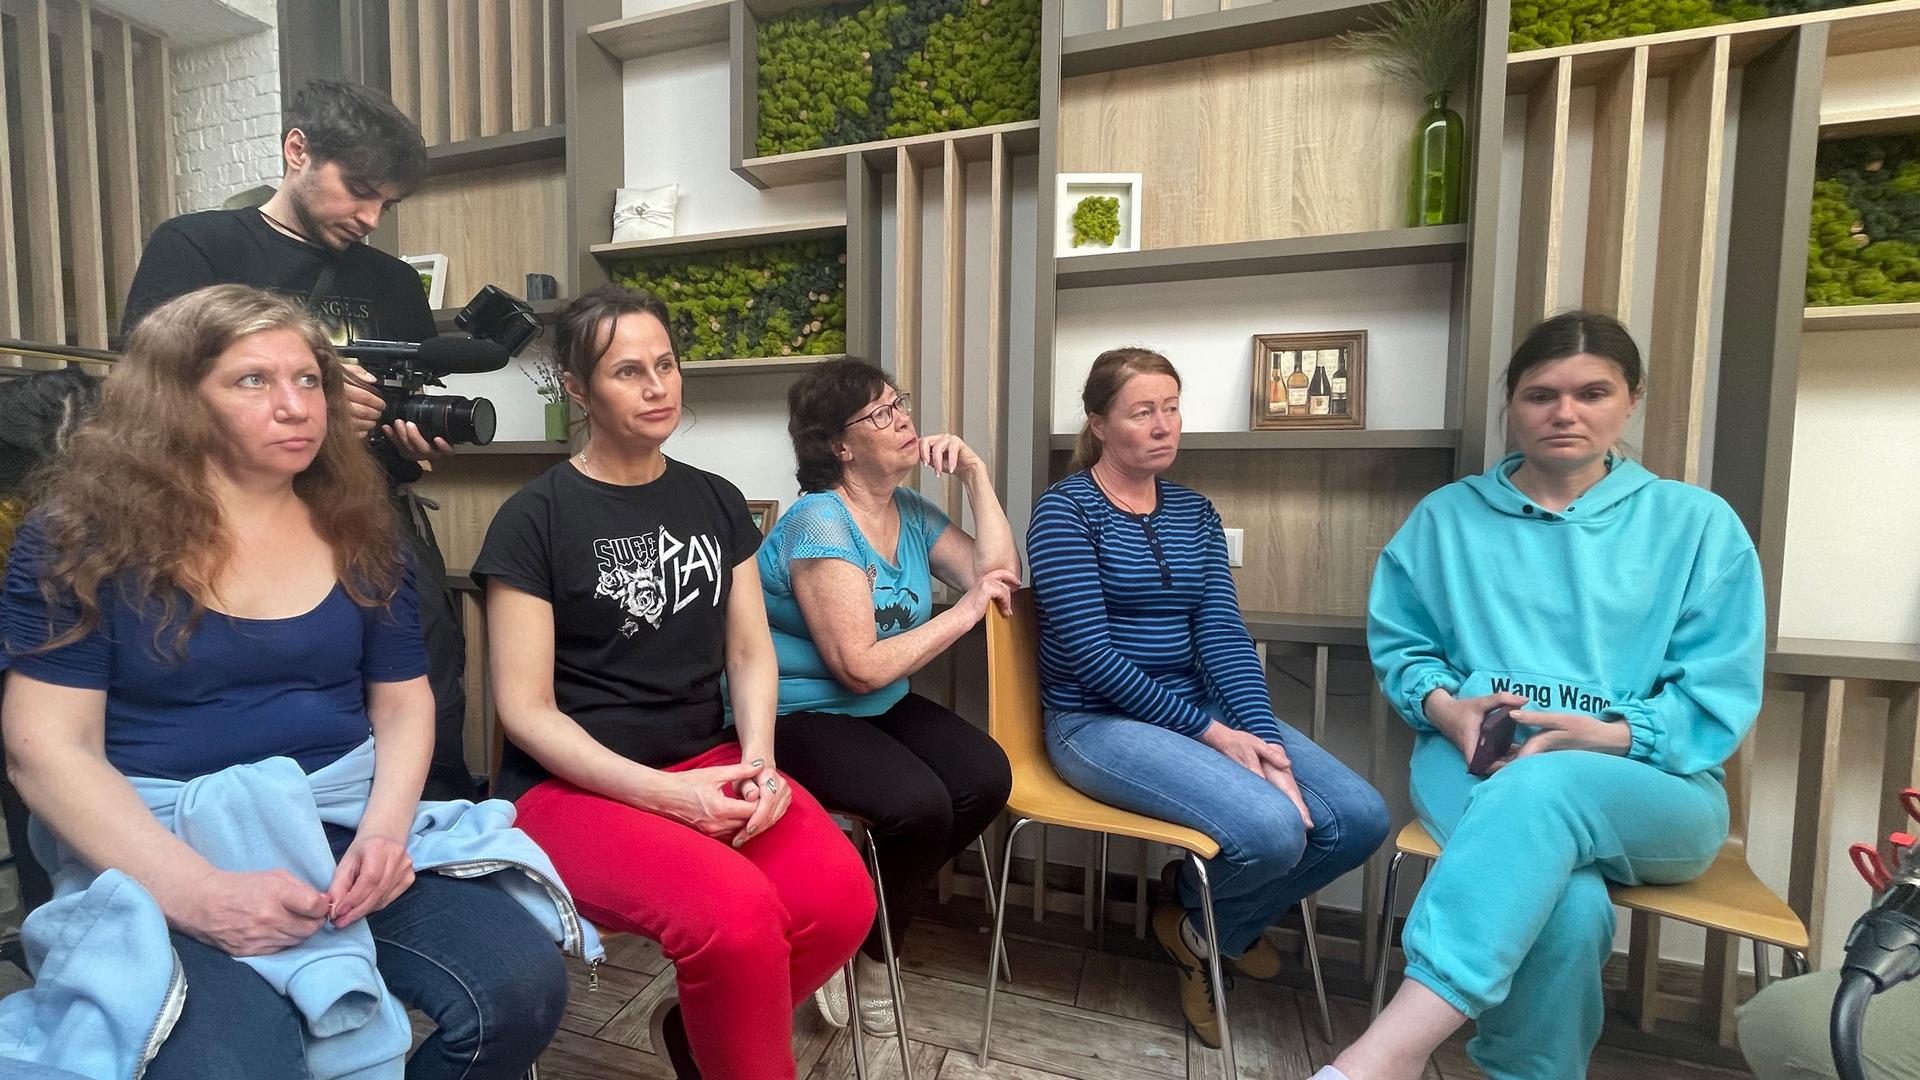 A group of mothers and guardians meet to discuss an upcoming trip to Russia and occupied parts of Ukraine to retrieve their missing children.